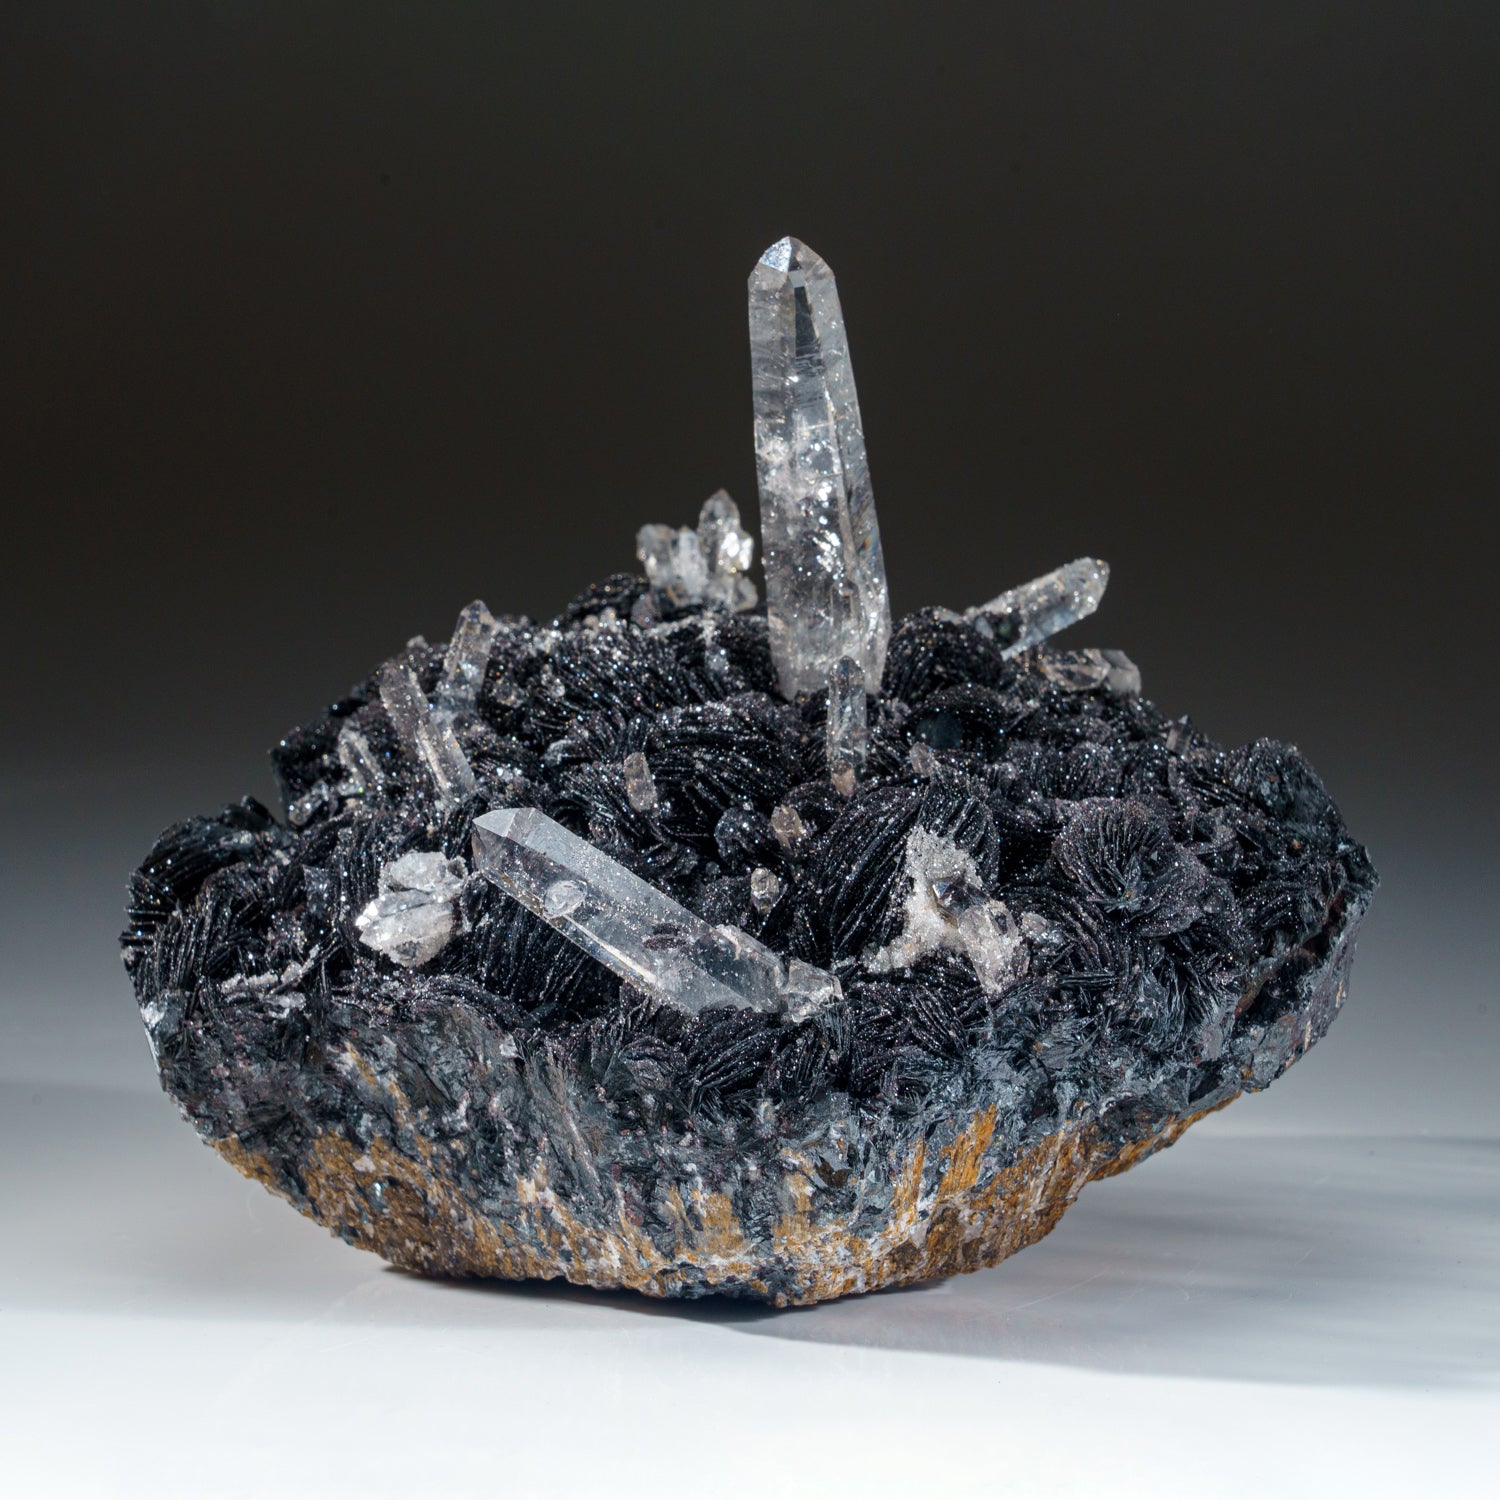 Quartz with Hematite Rosette from Lechang Mine, Guangdong Province, China